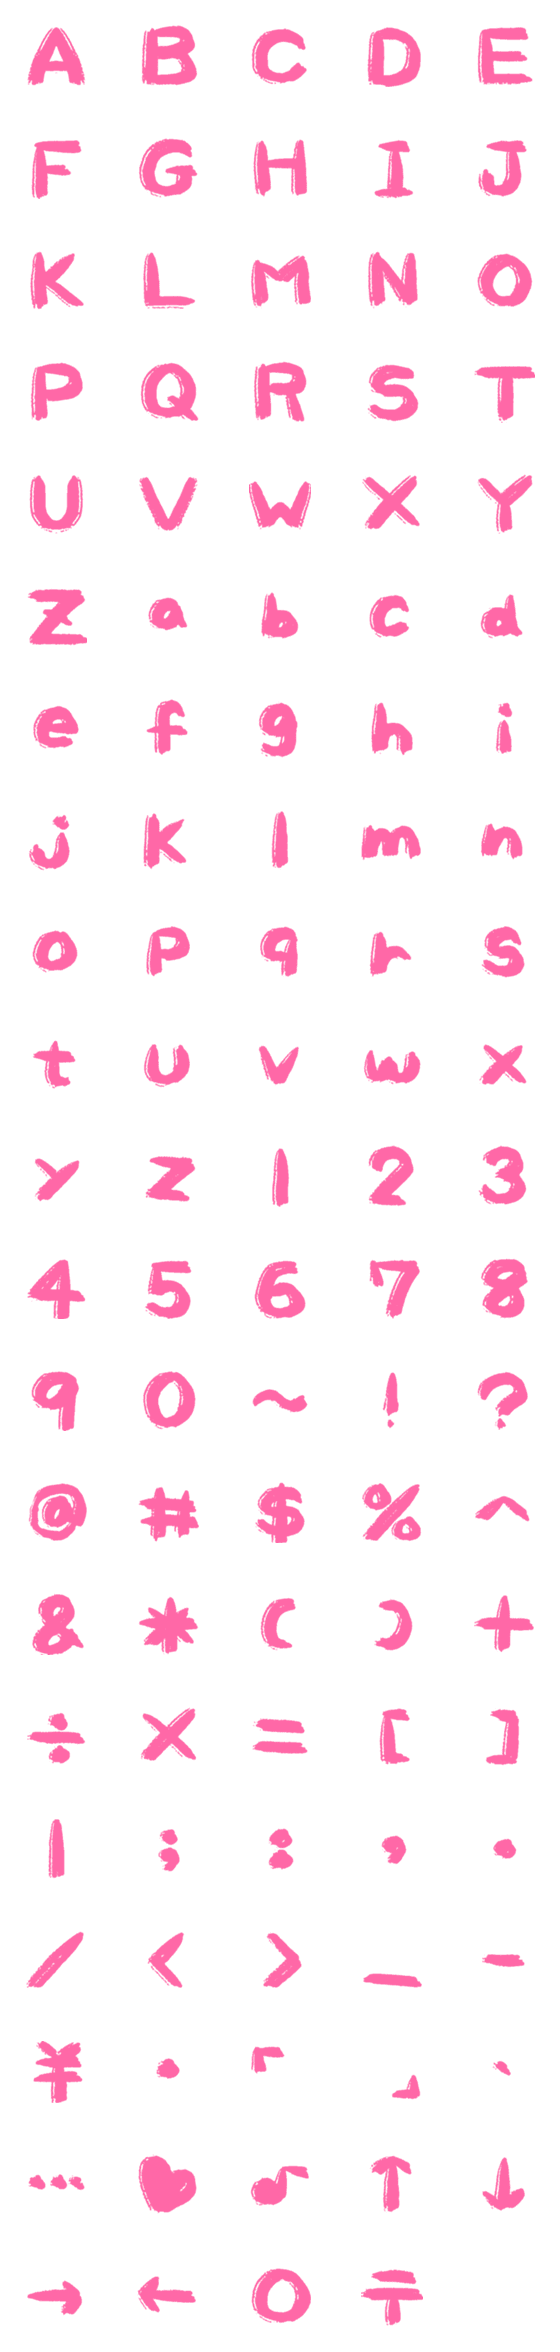 [LINE絵文字]NEON DREAMS Letter number symbolsの画像一覧